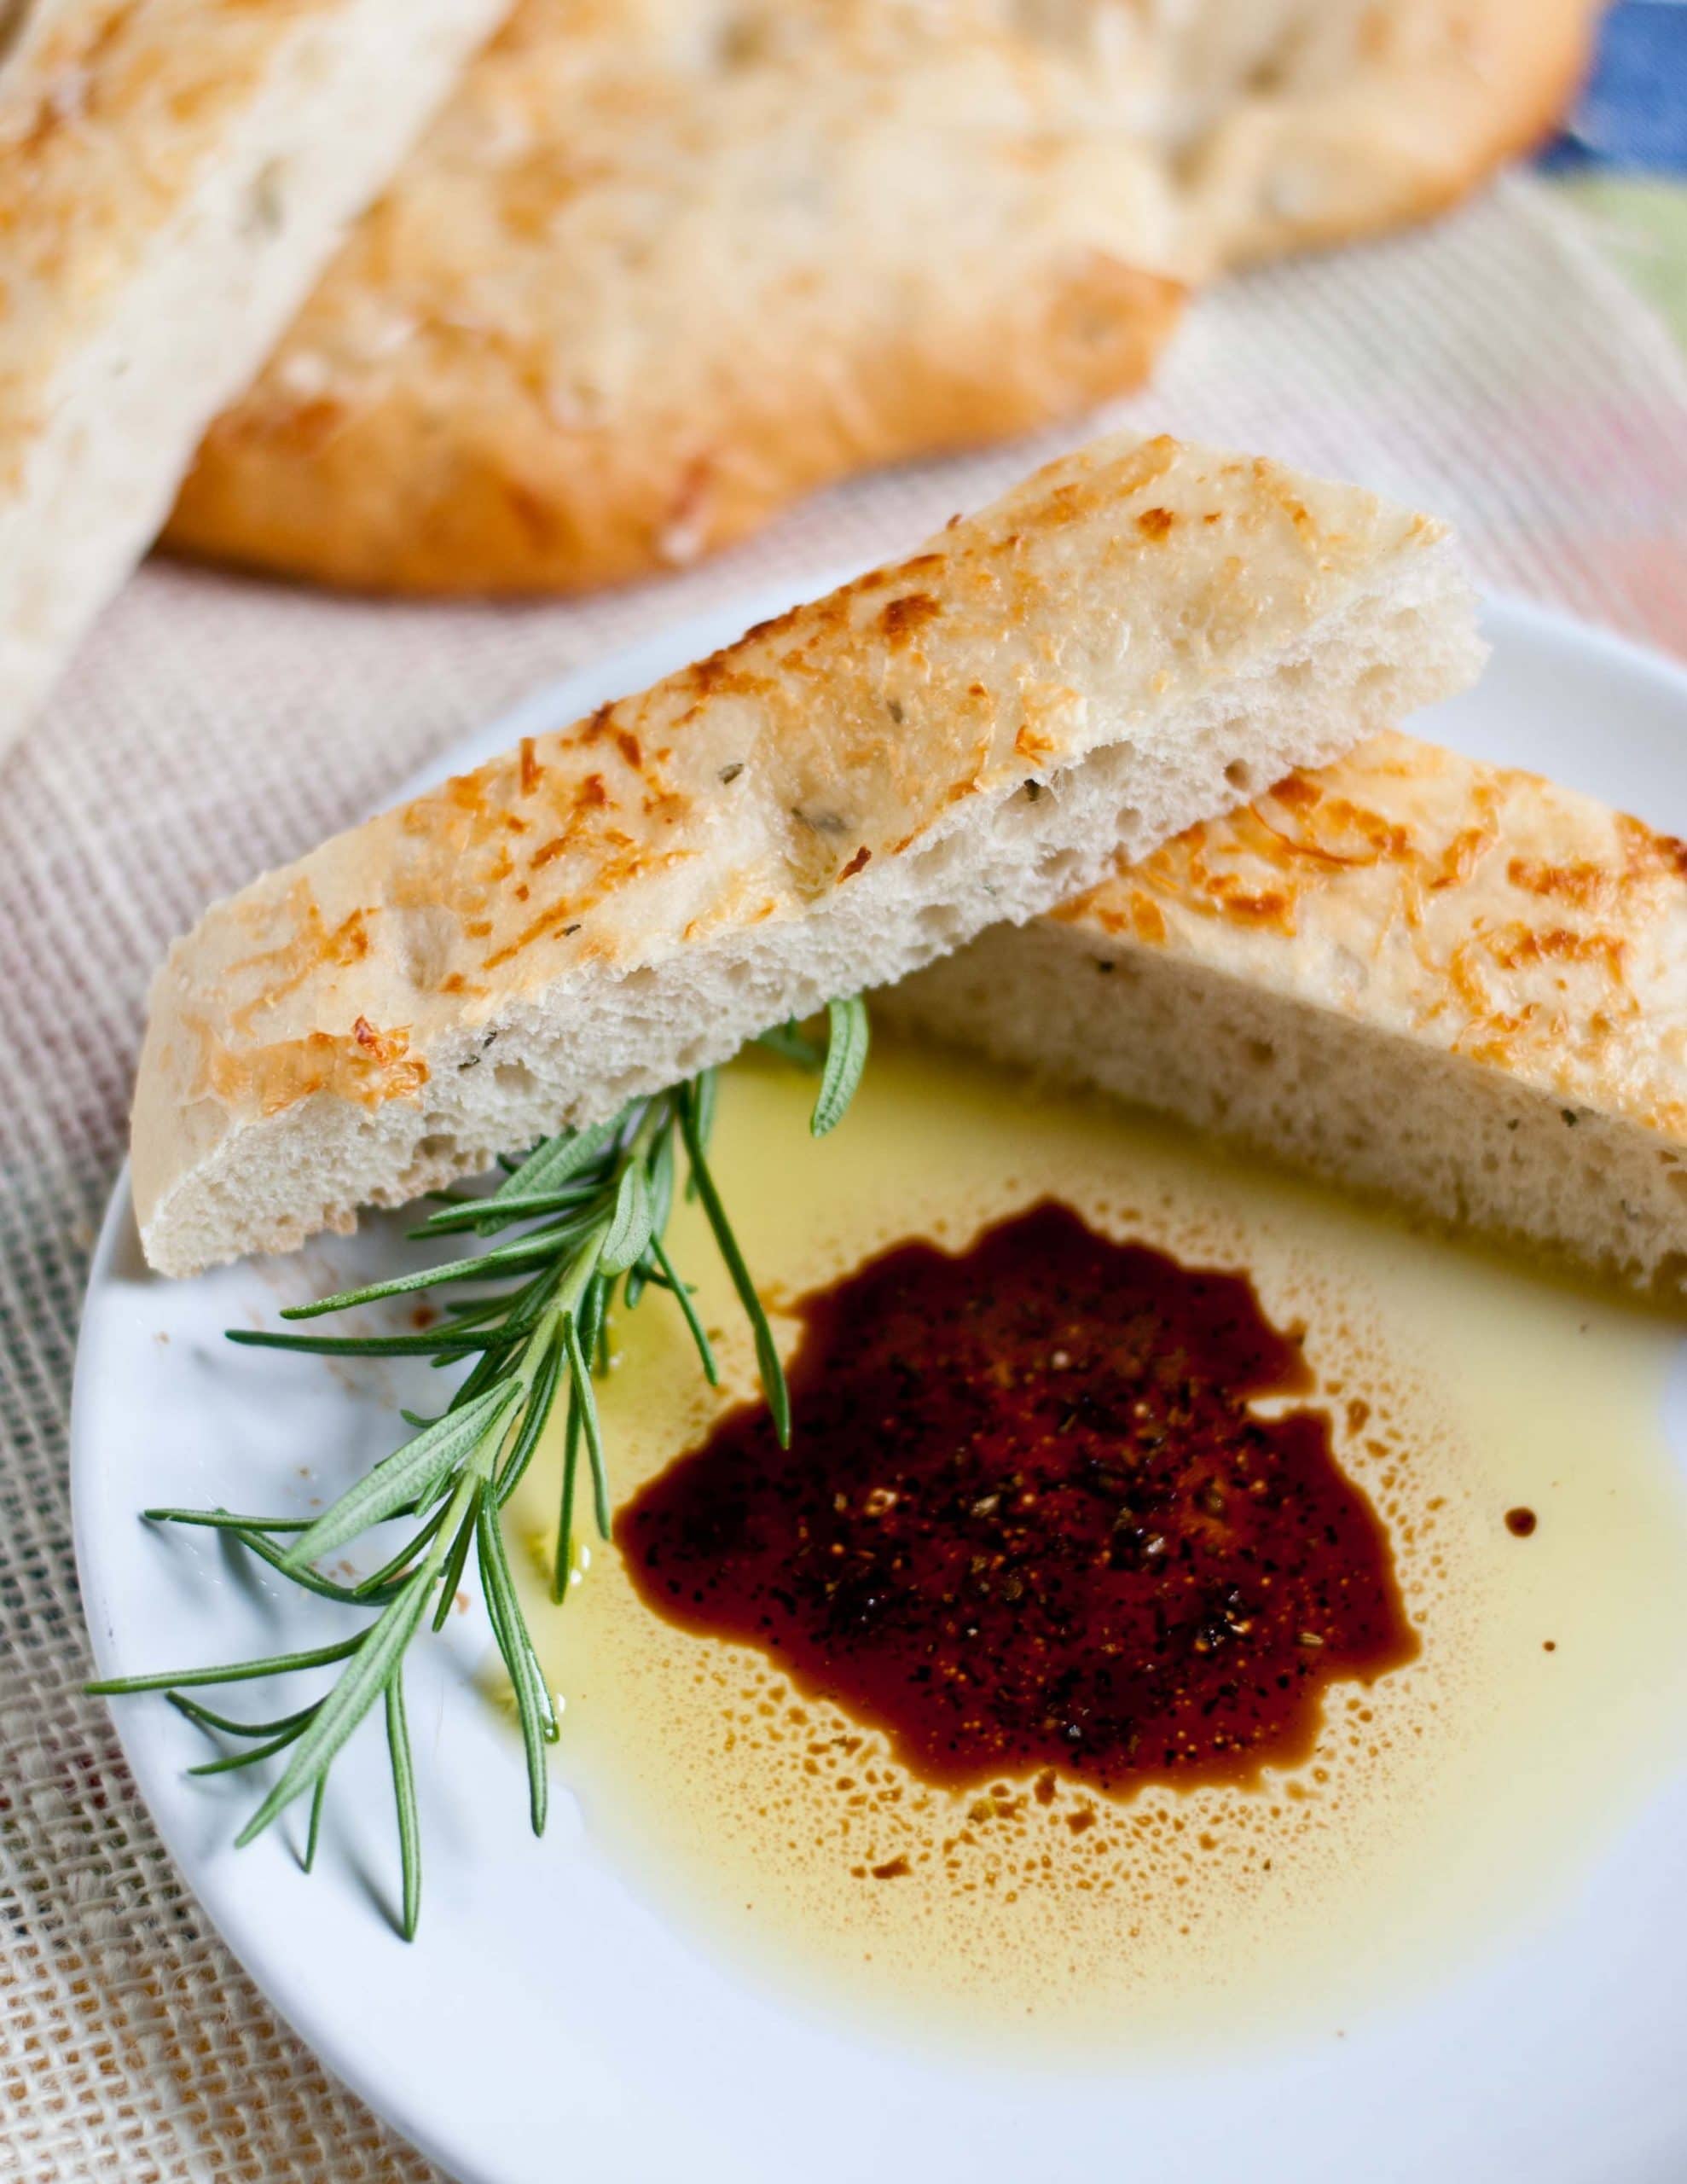 Rosemary and Olive Oil Focaccia Bread | Neighborfoodblog.com